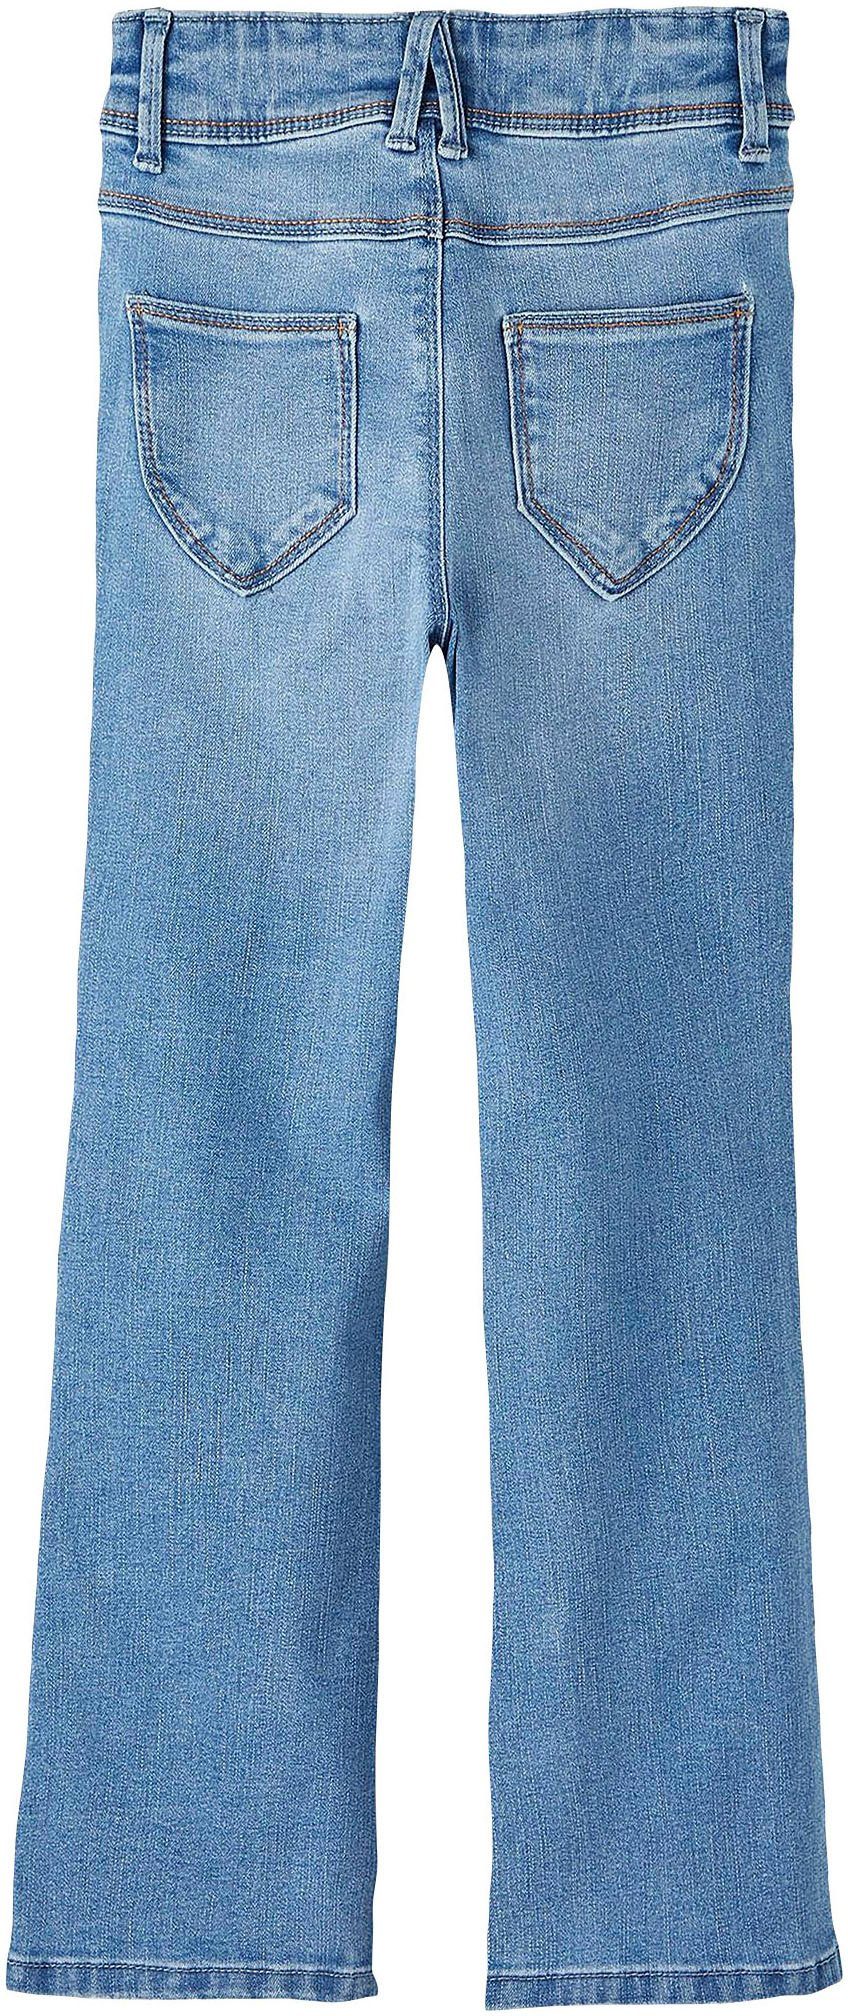 blue mit medium Bootcut-Jeans Name NKFPOLLY Stretch SKINNY BOOT NOOS JEANS 1142-AU It